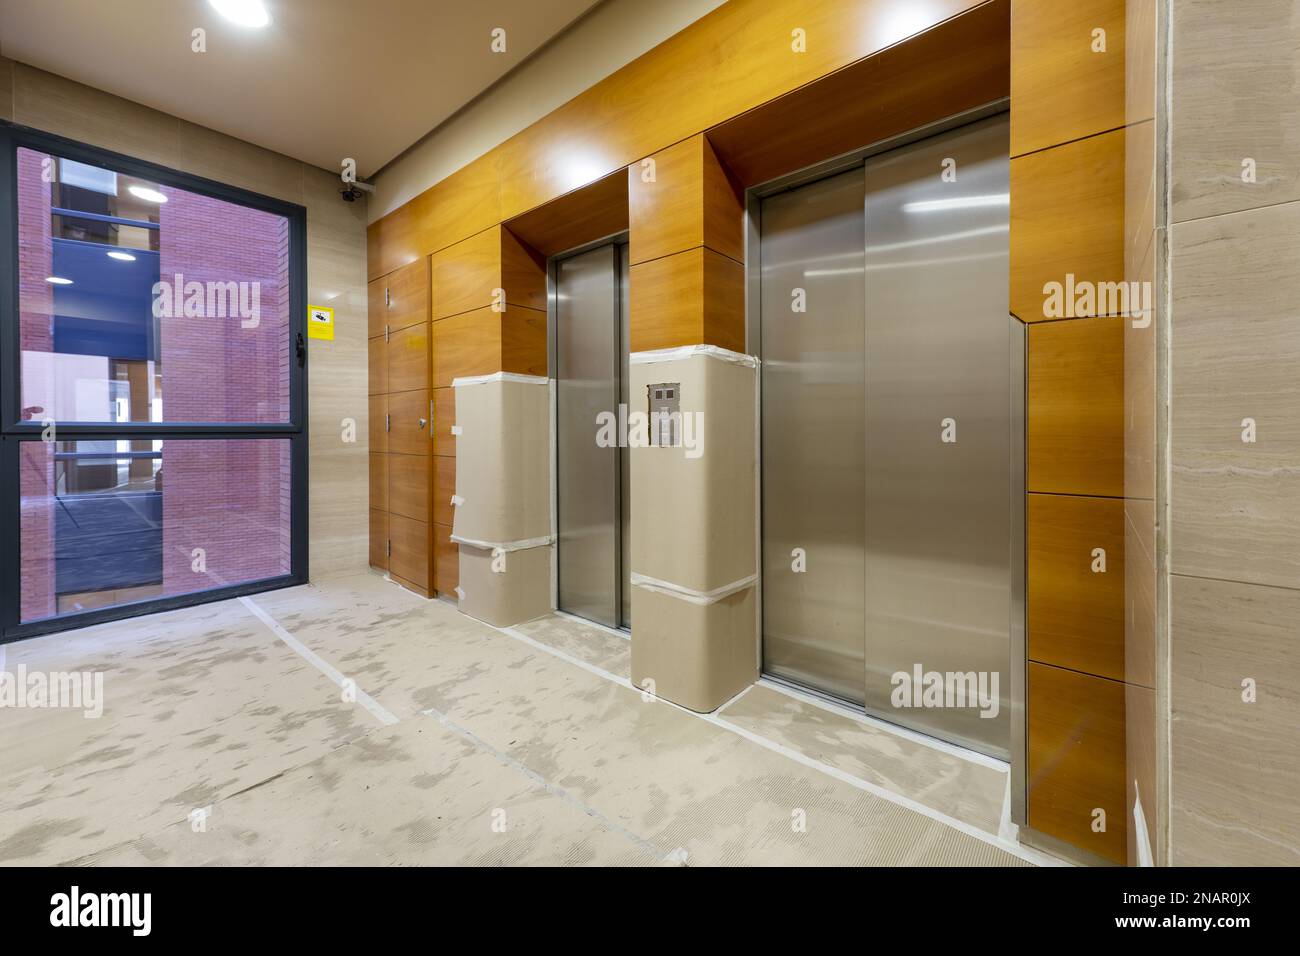 Elevator area of an office building with walls and floors covered with cardboard due to being under construction Stock Photo